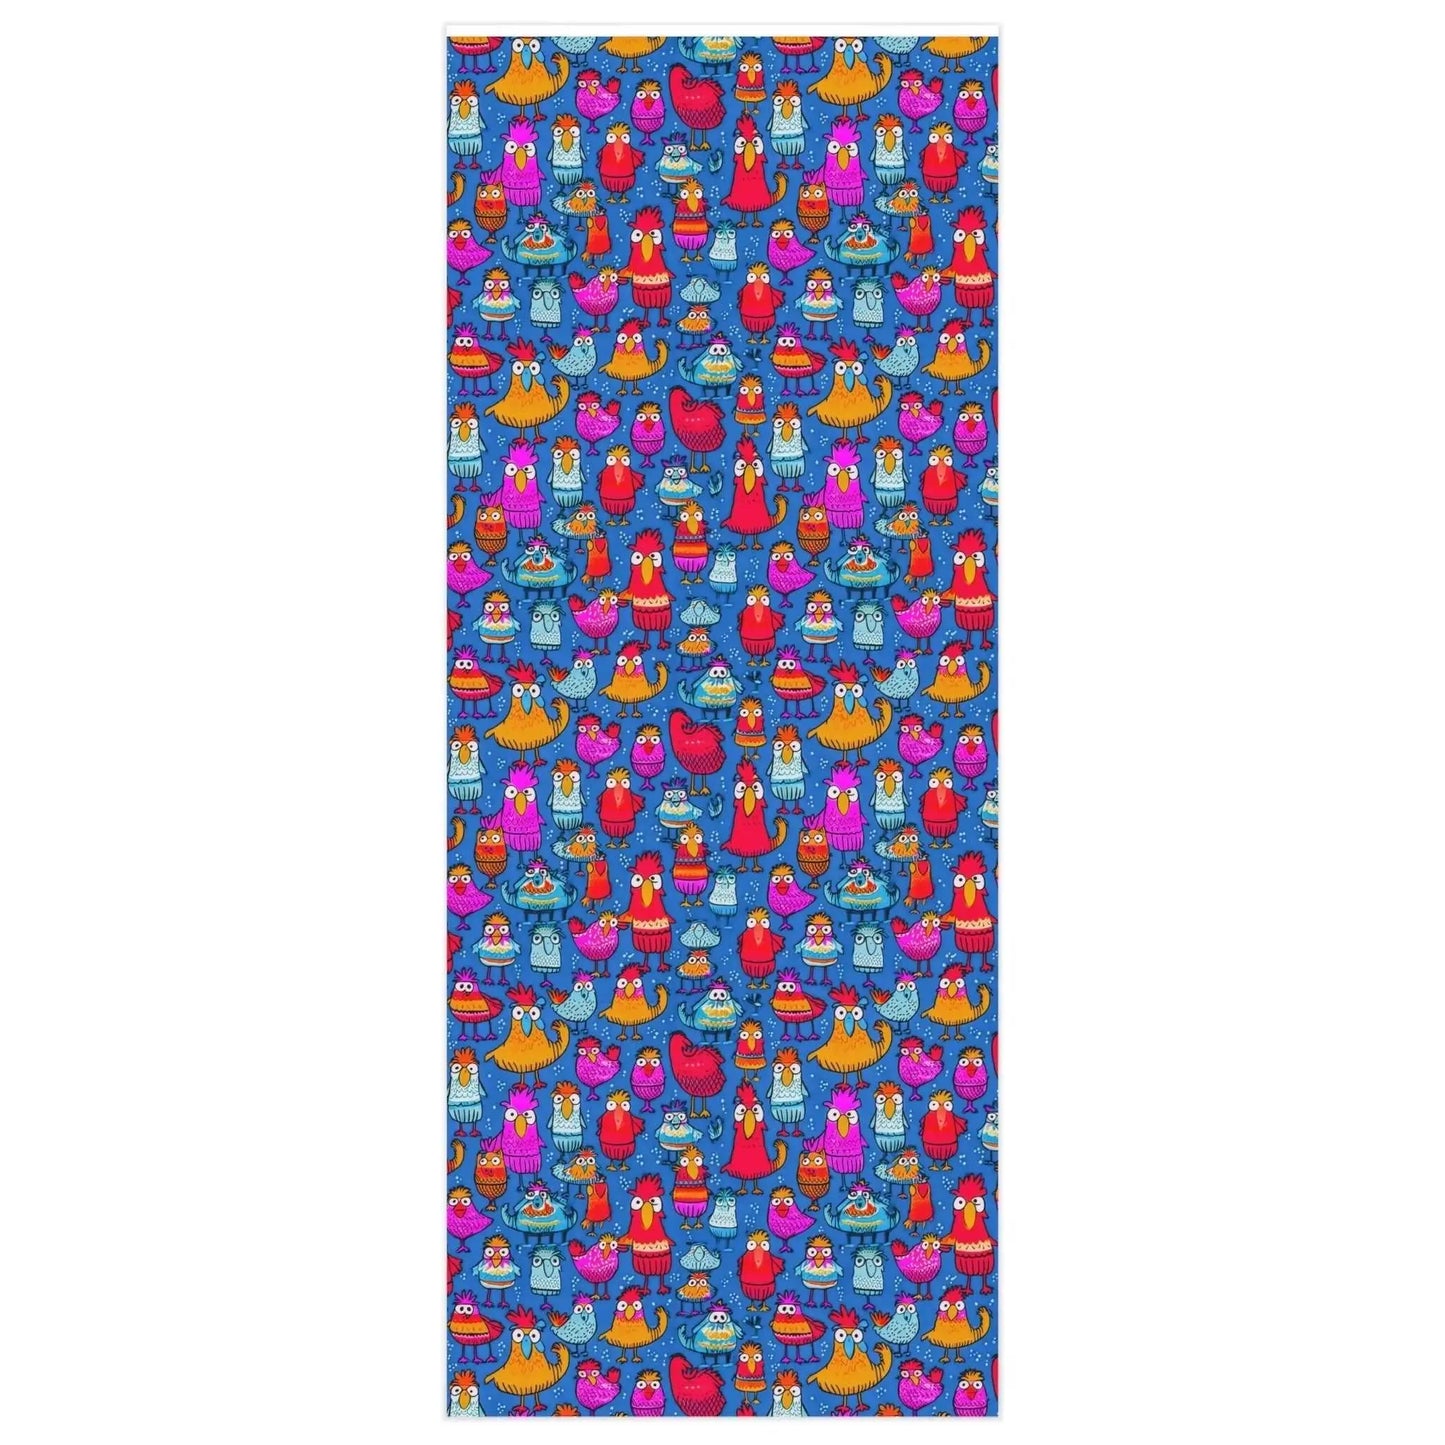 Colorful Chickens Wrapping Paper Rolls from The Curated Goose